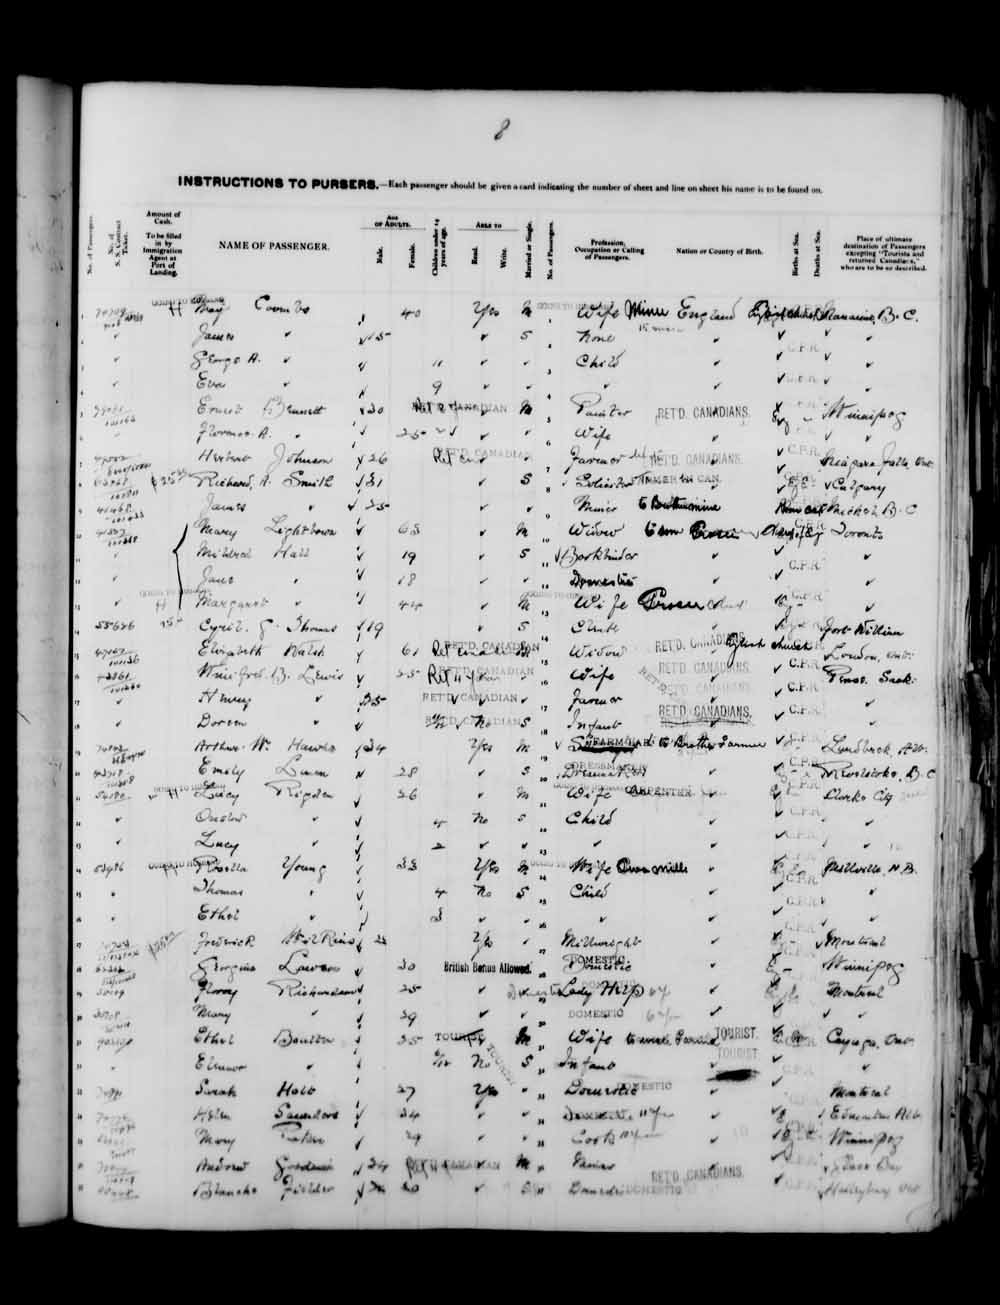 Digitized page of Quebec Passenger Lists for Image No.: e003591579